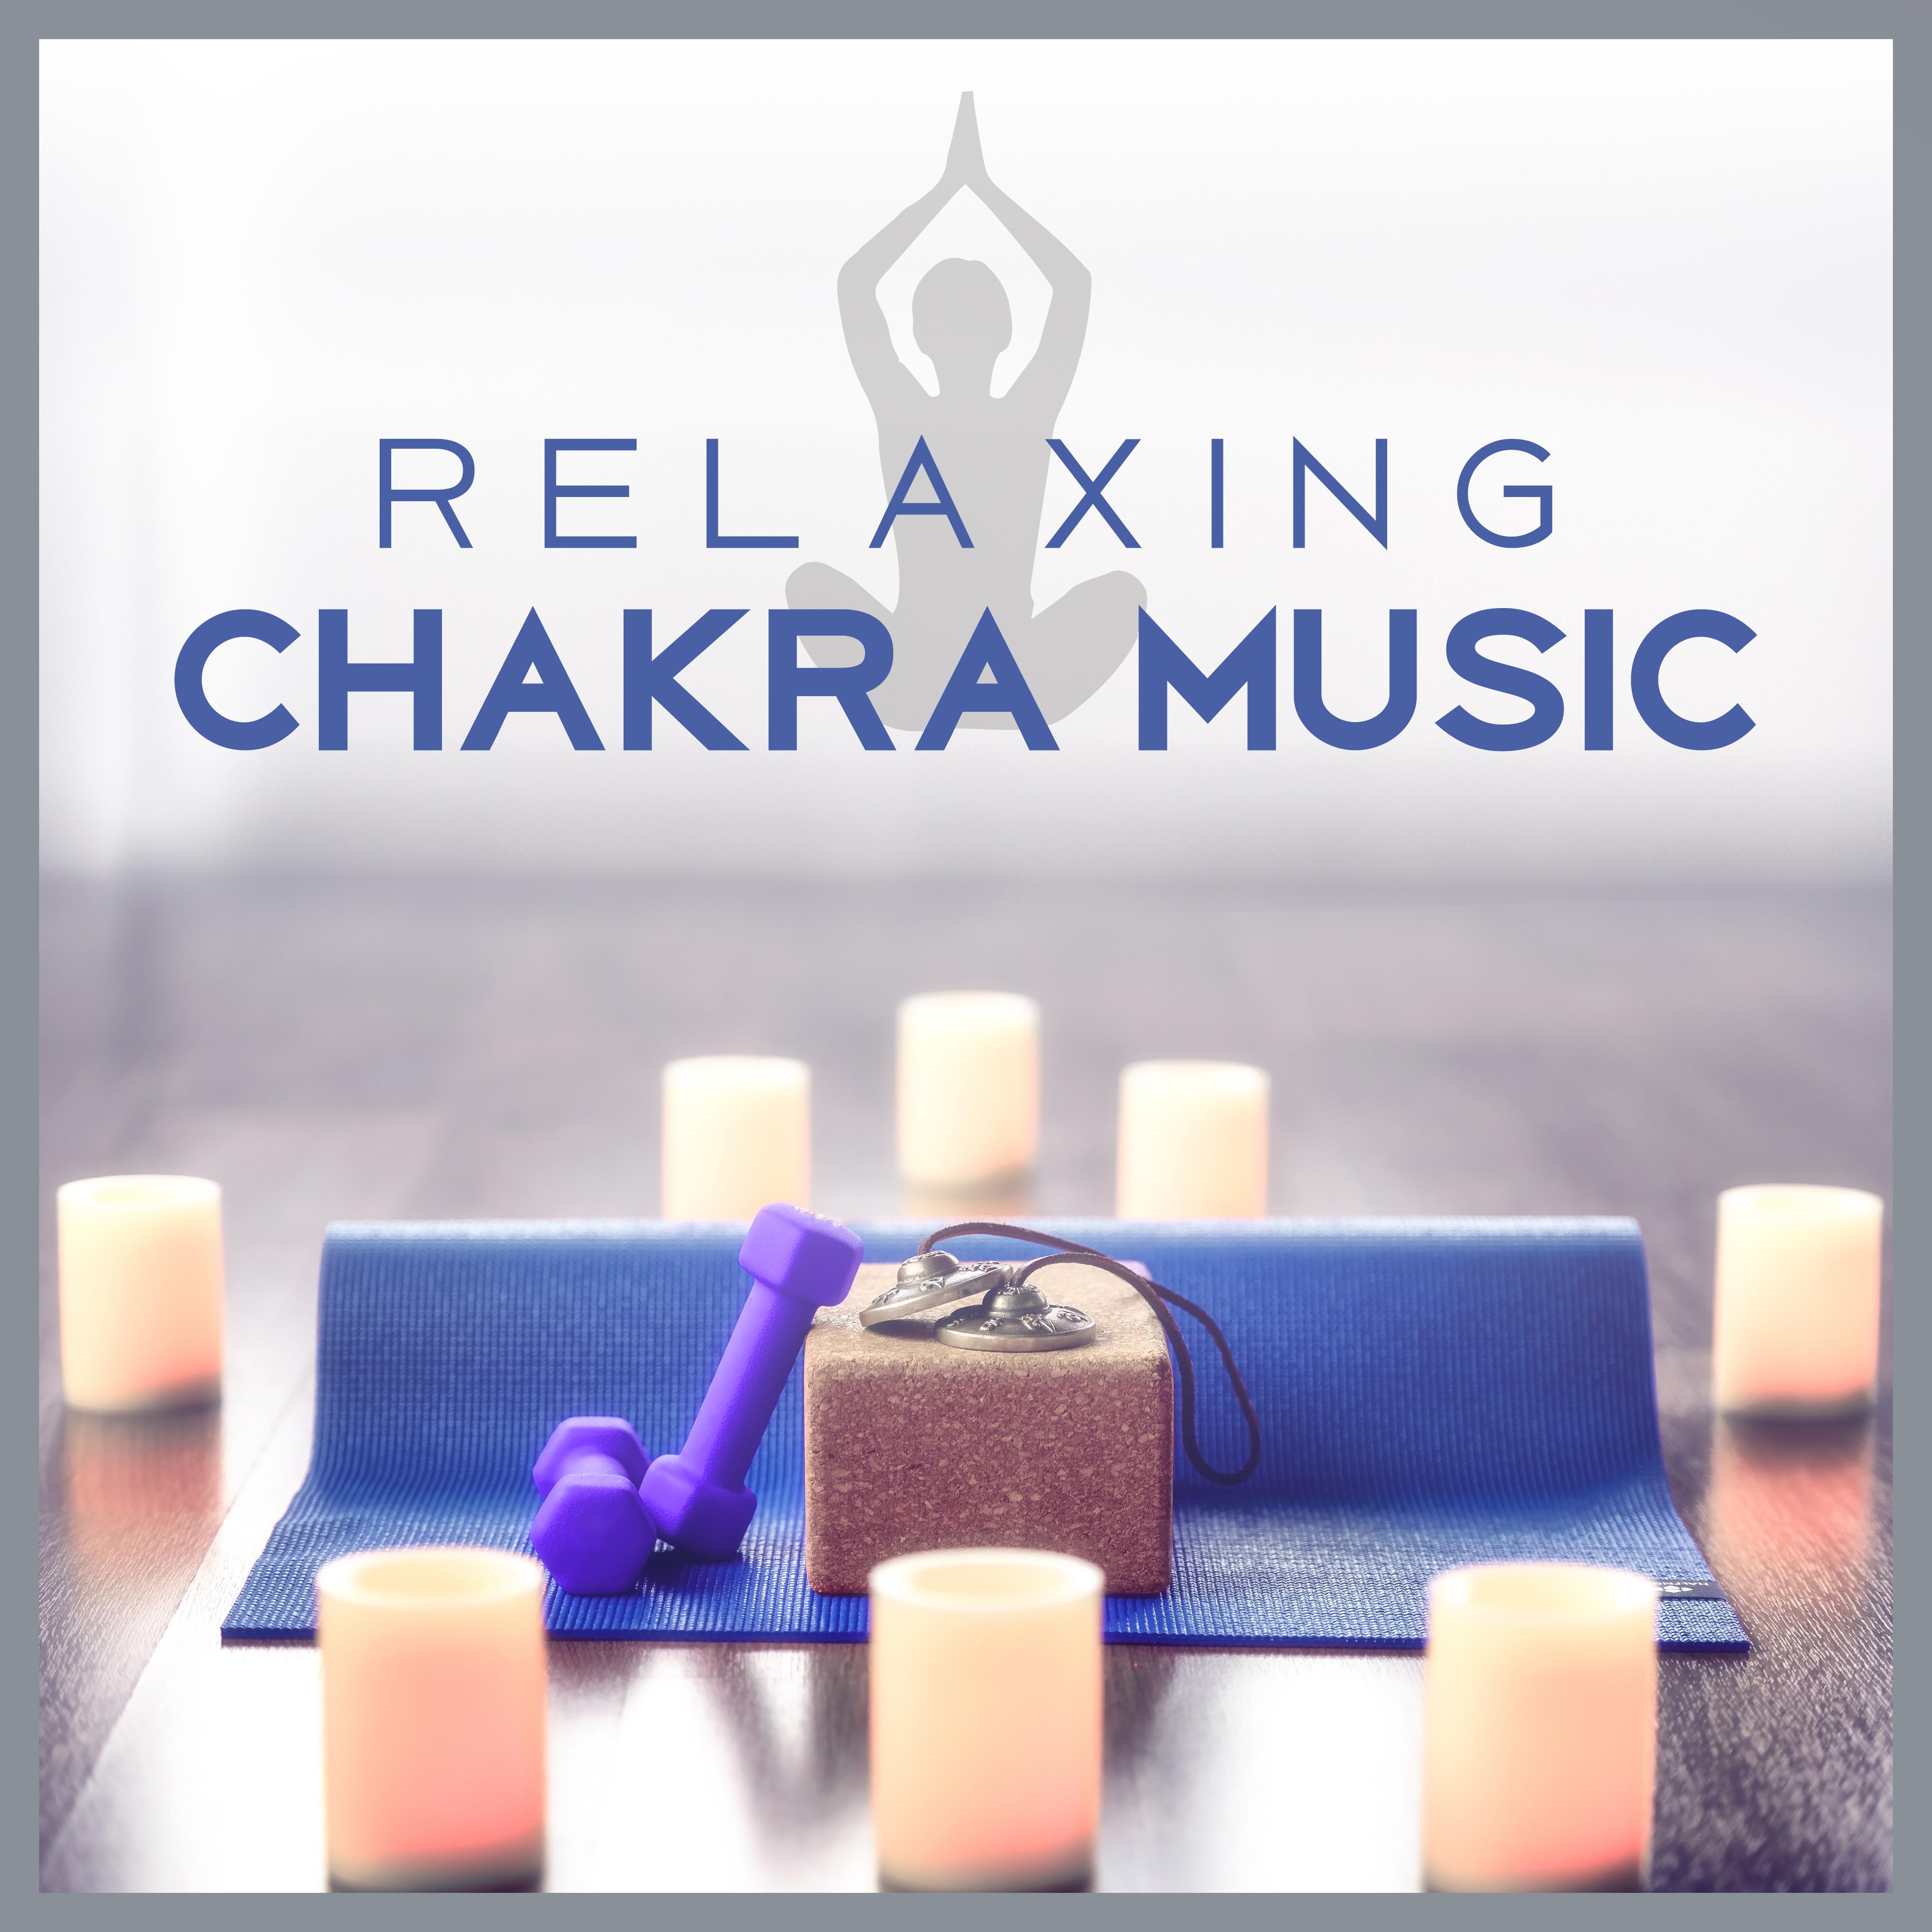 Relaxing Chakra Music  Soothing Waves, Harmony Sounds, Yoga Training, Meditation Calmness, Peaceful Mind